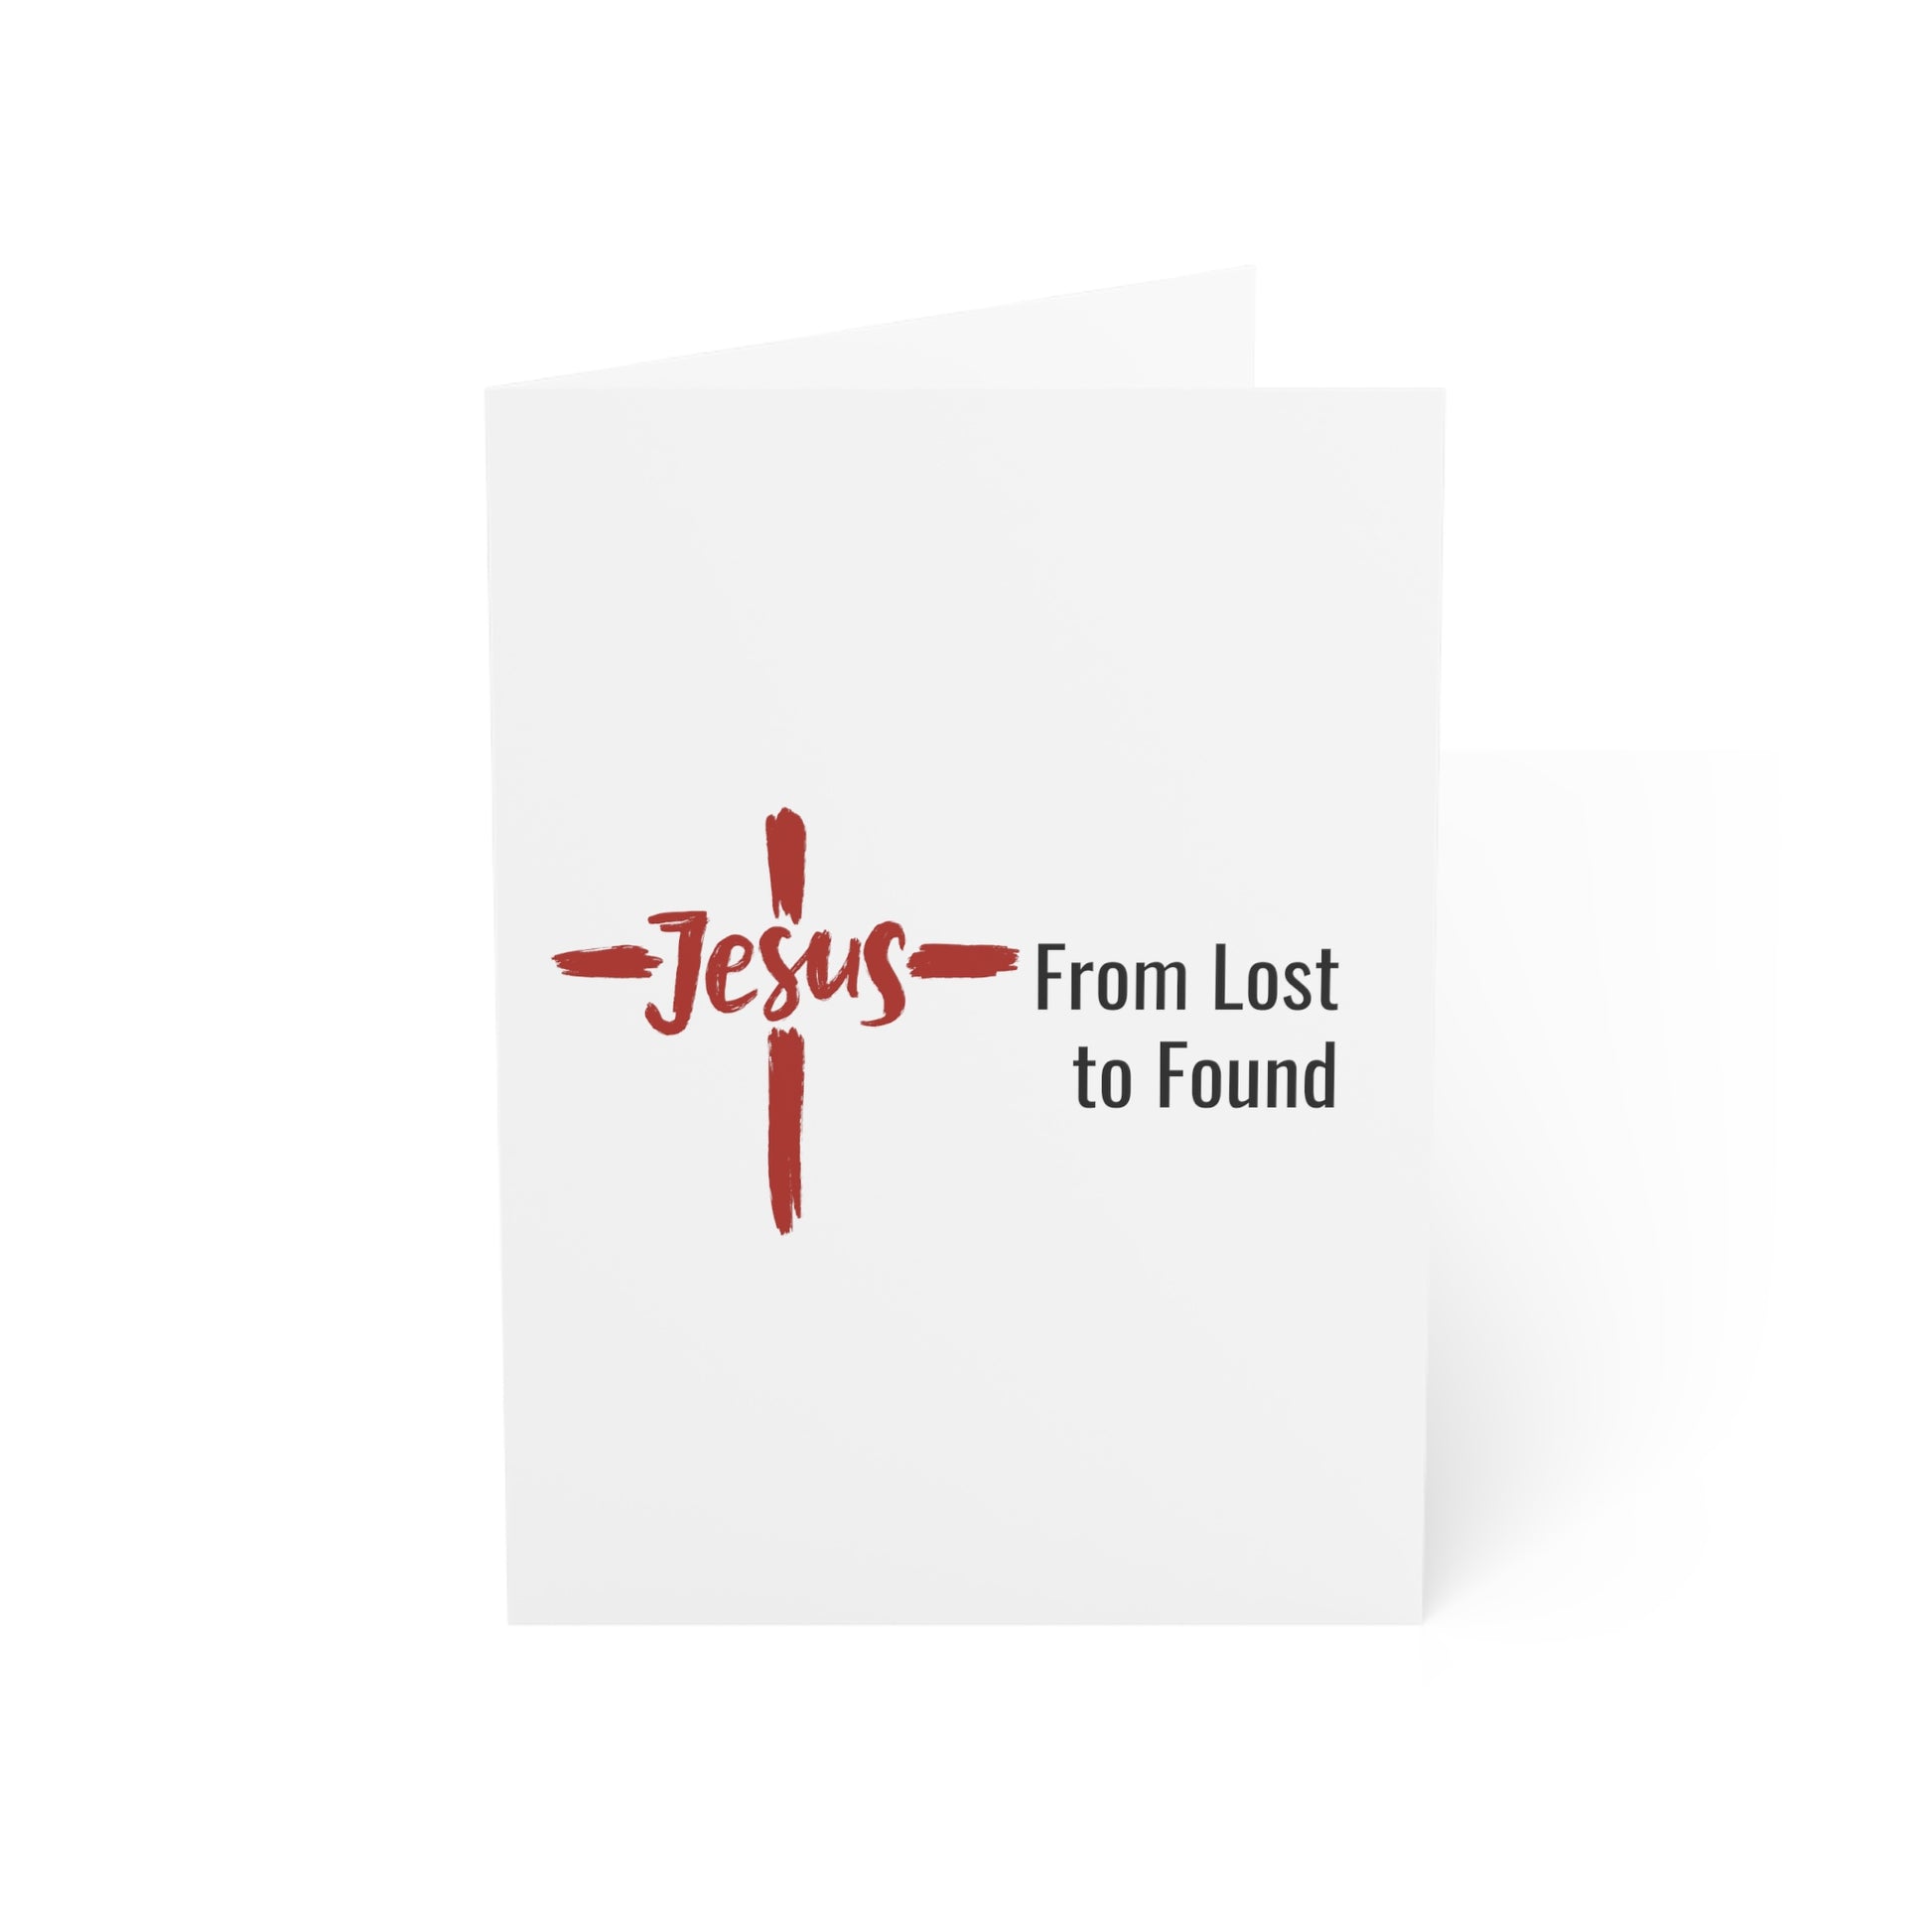 Jesus, From Lost to Found Greeting Cards available at SmithRidge.farm in size 5"x7" with envelopes.